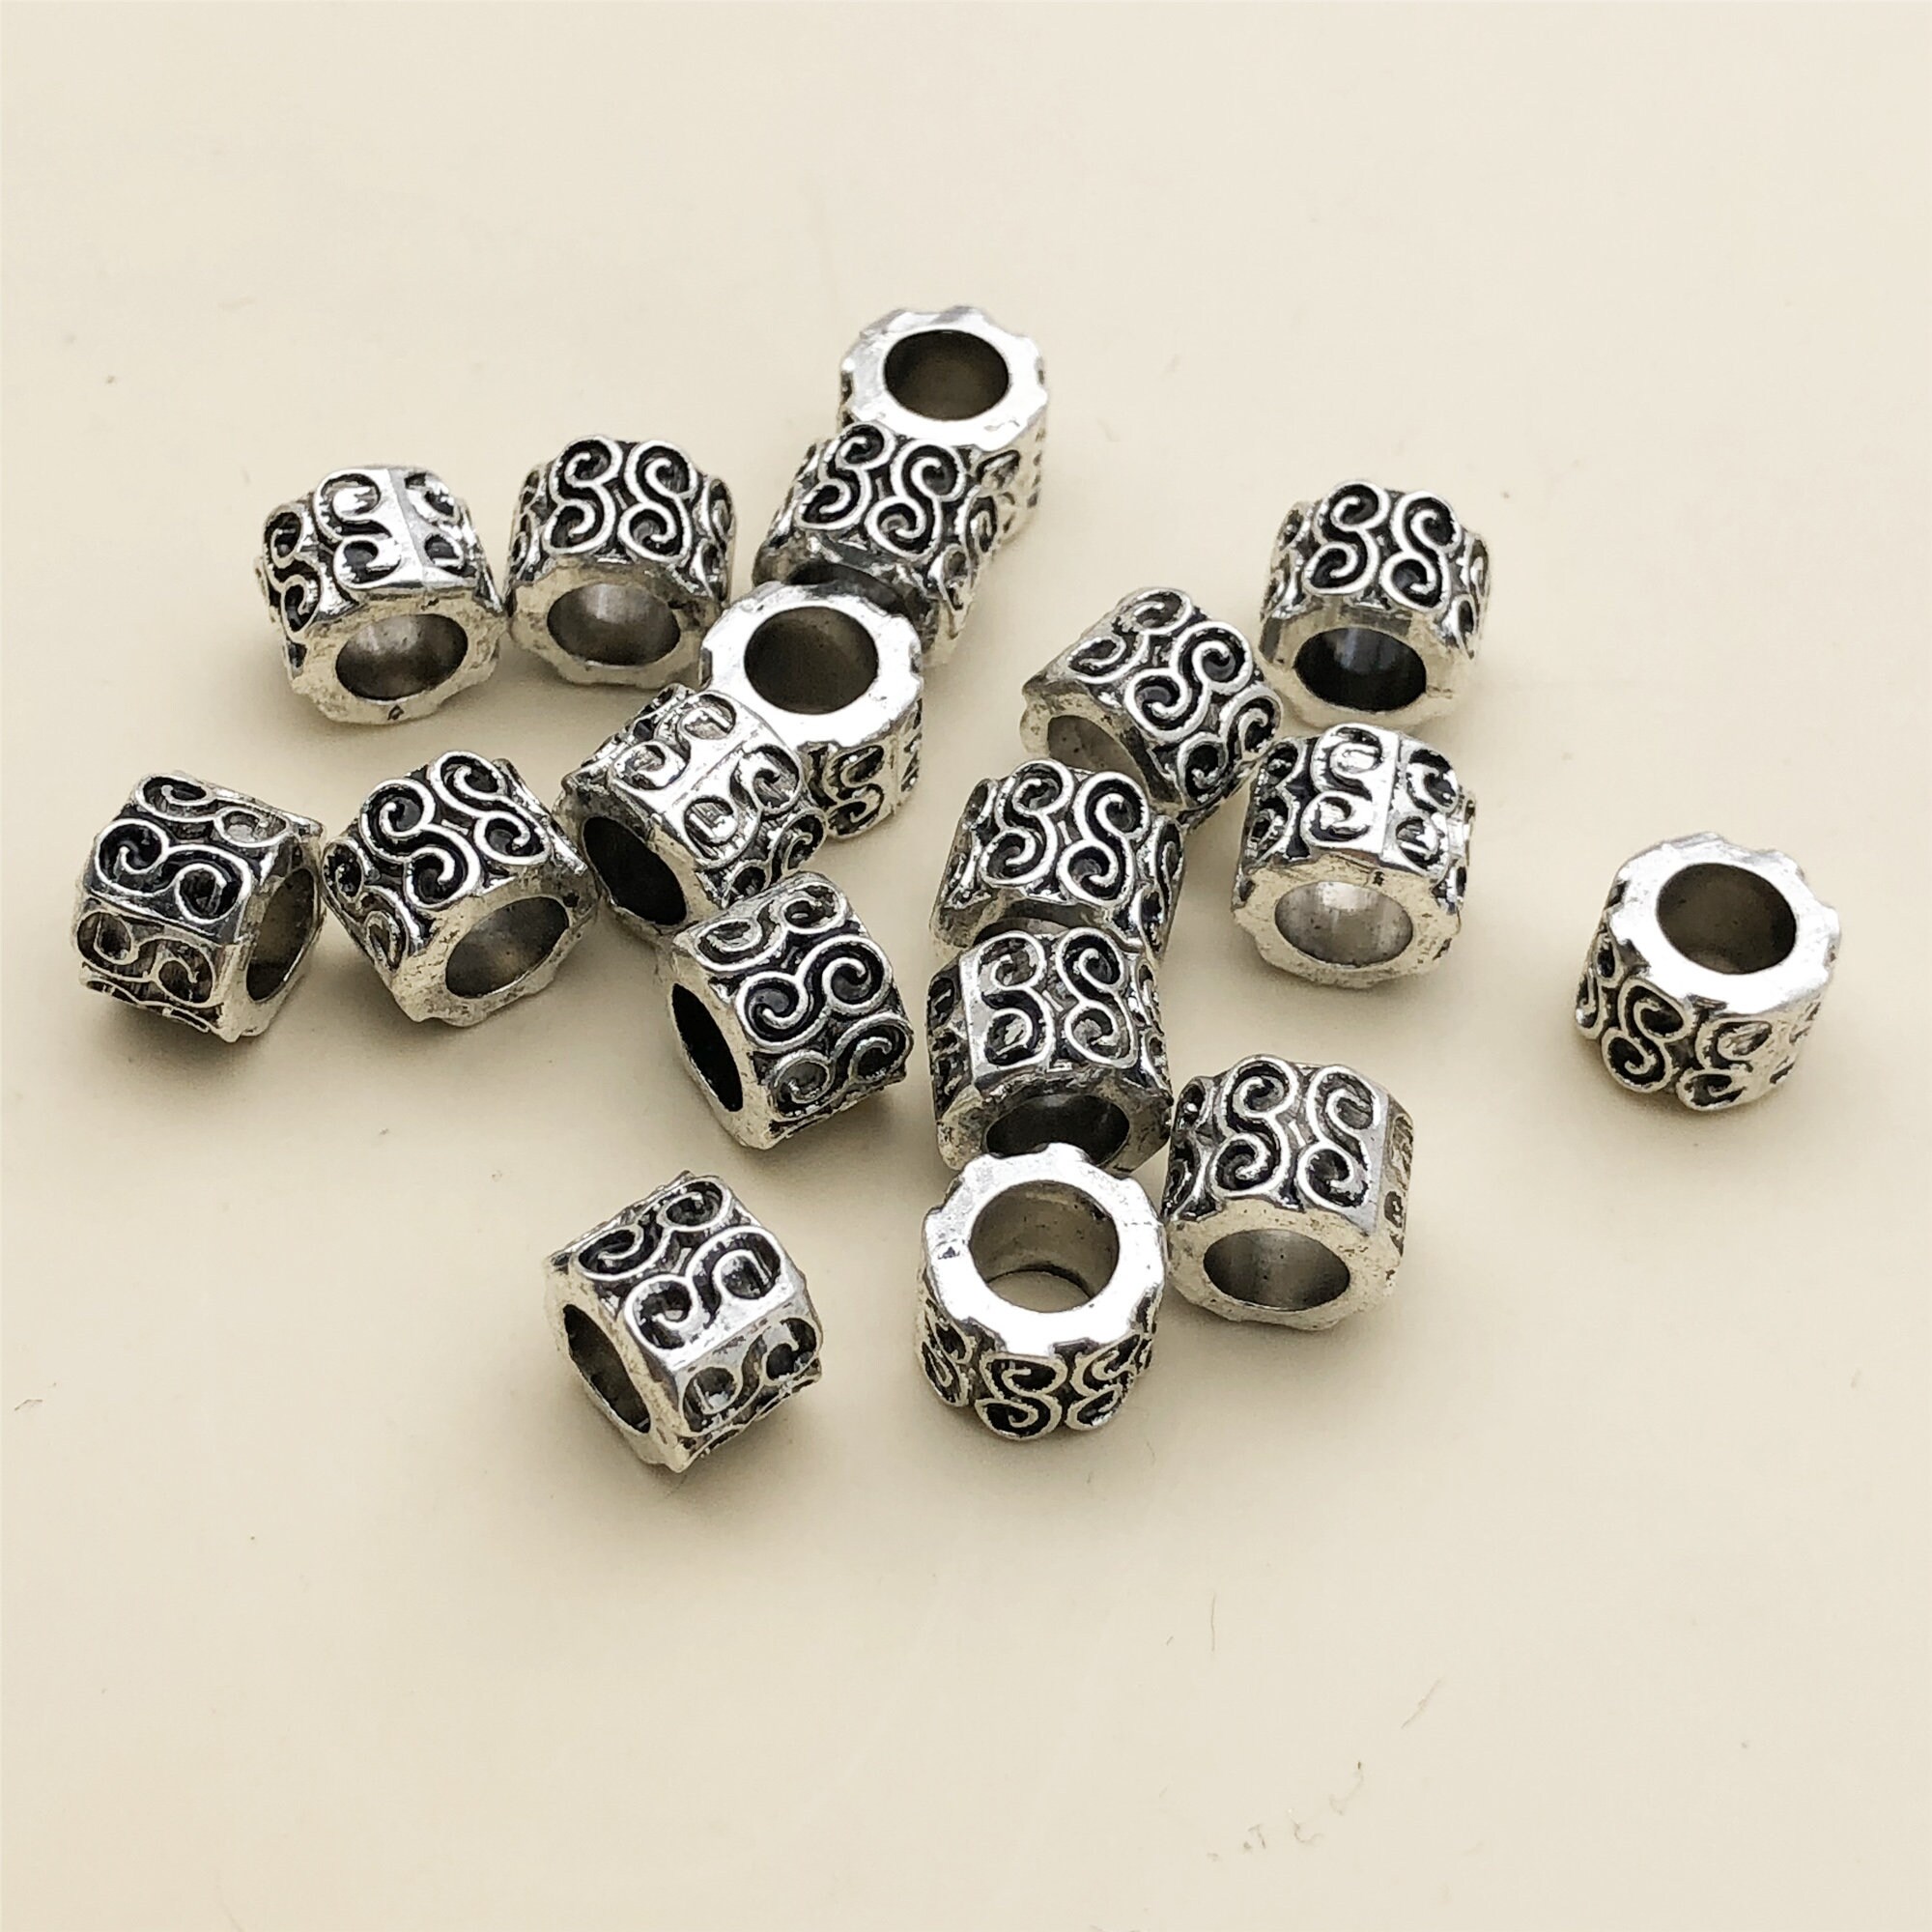 Tibetan Silver Connector Metal Spacer Charm Beads Jewelry Design Findings Crafts 